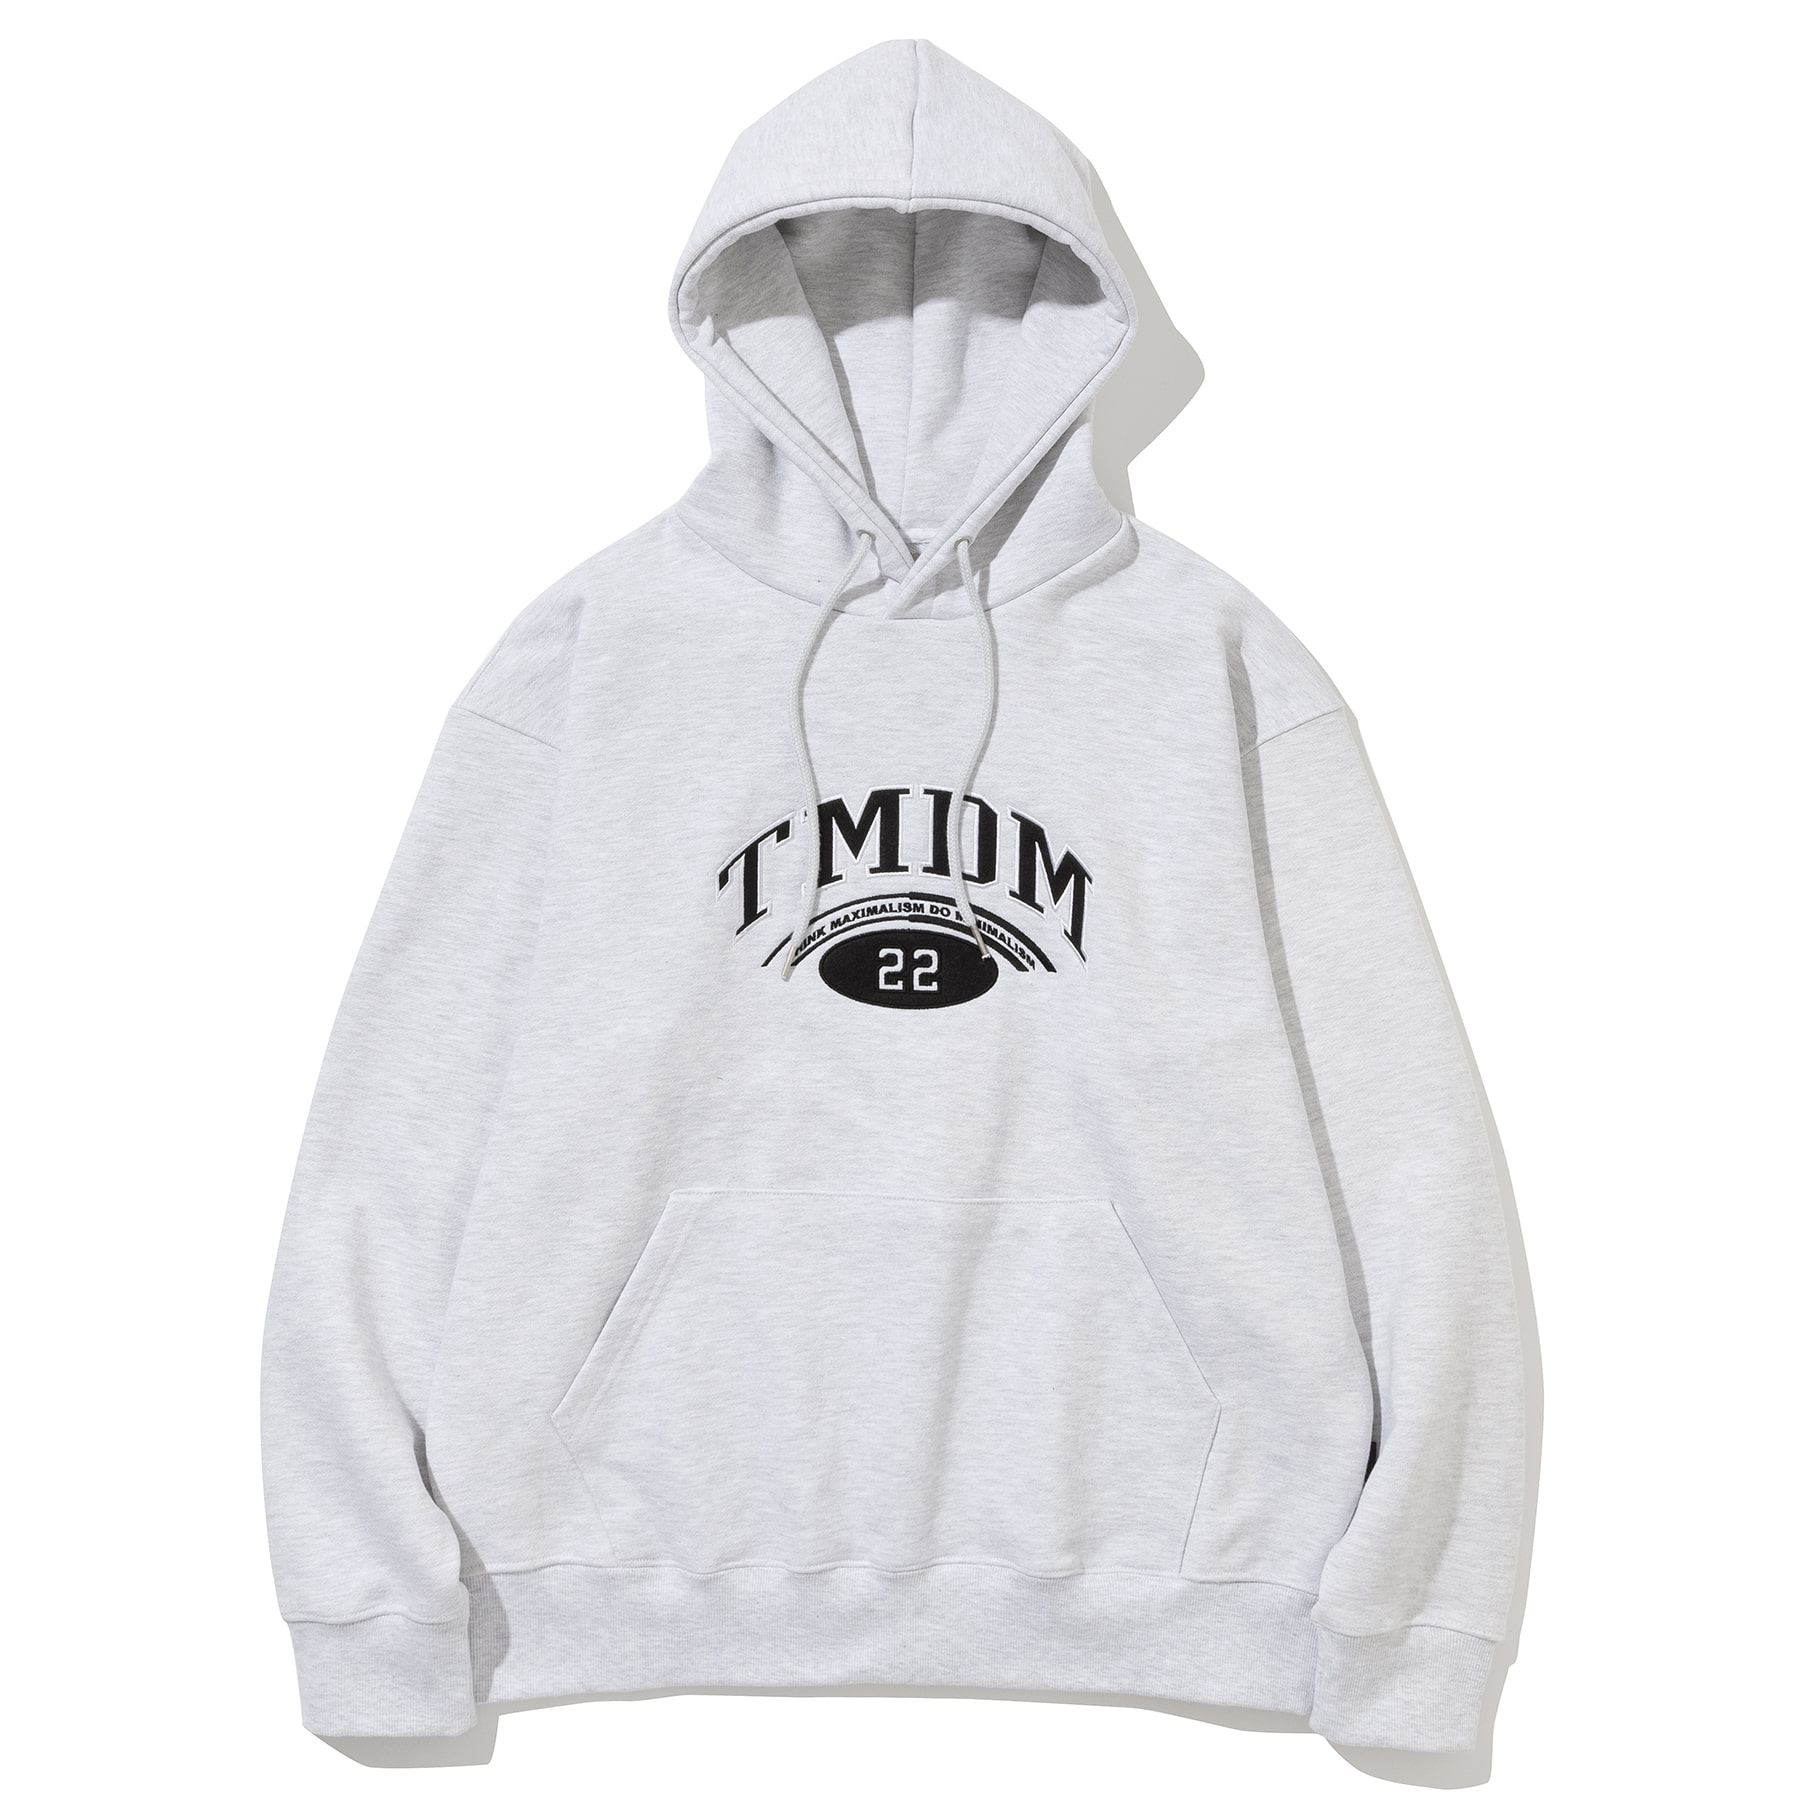 [OWN PROJECT] TMDM ARCH LETTERING HOOD SWEAT SHIRT #1